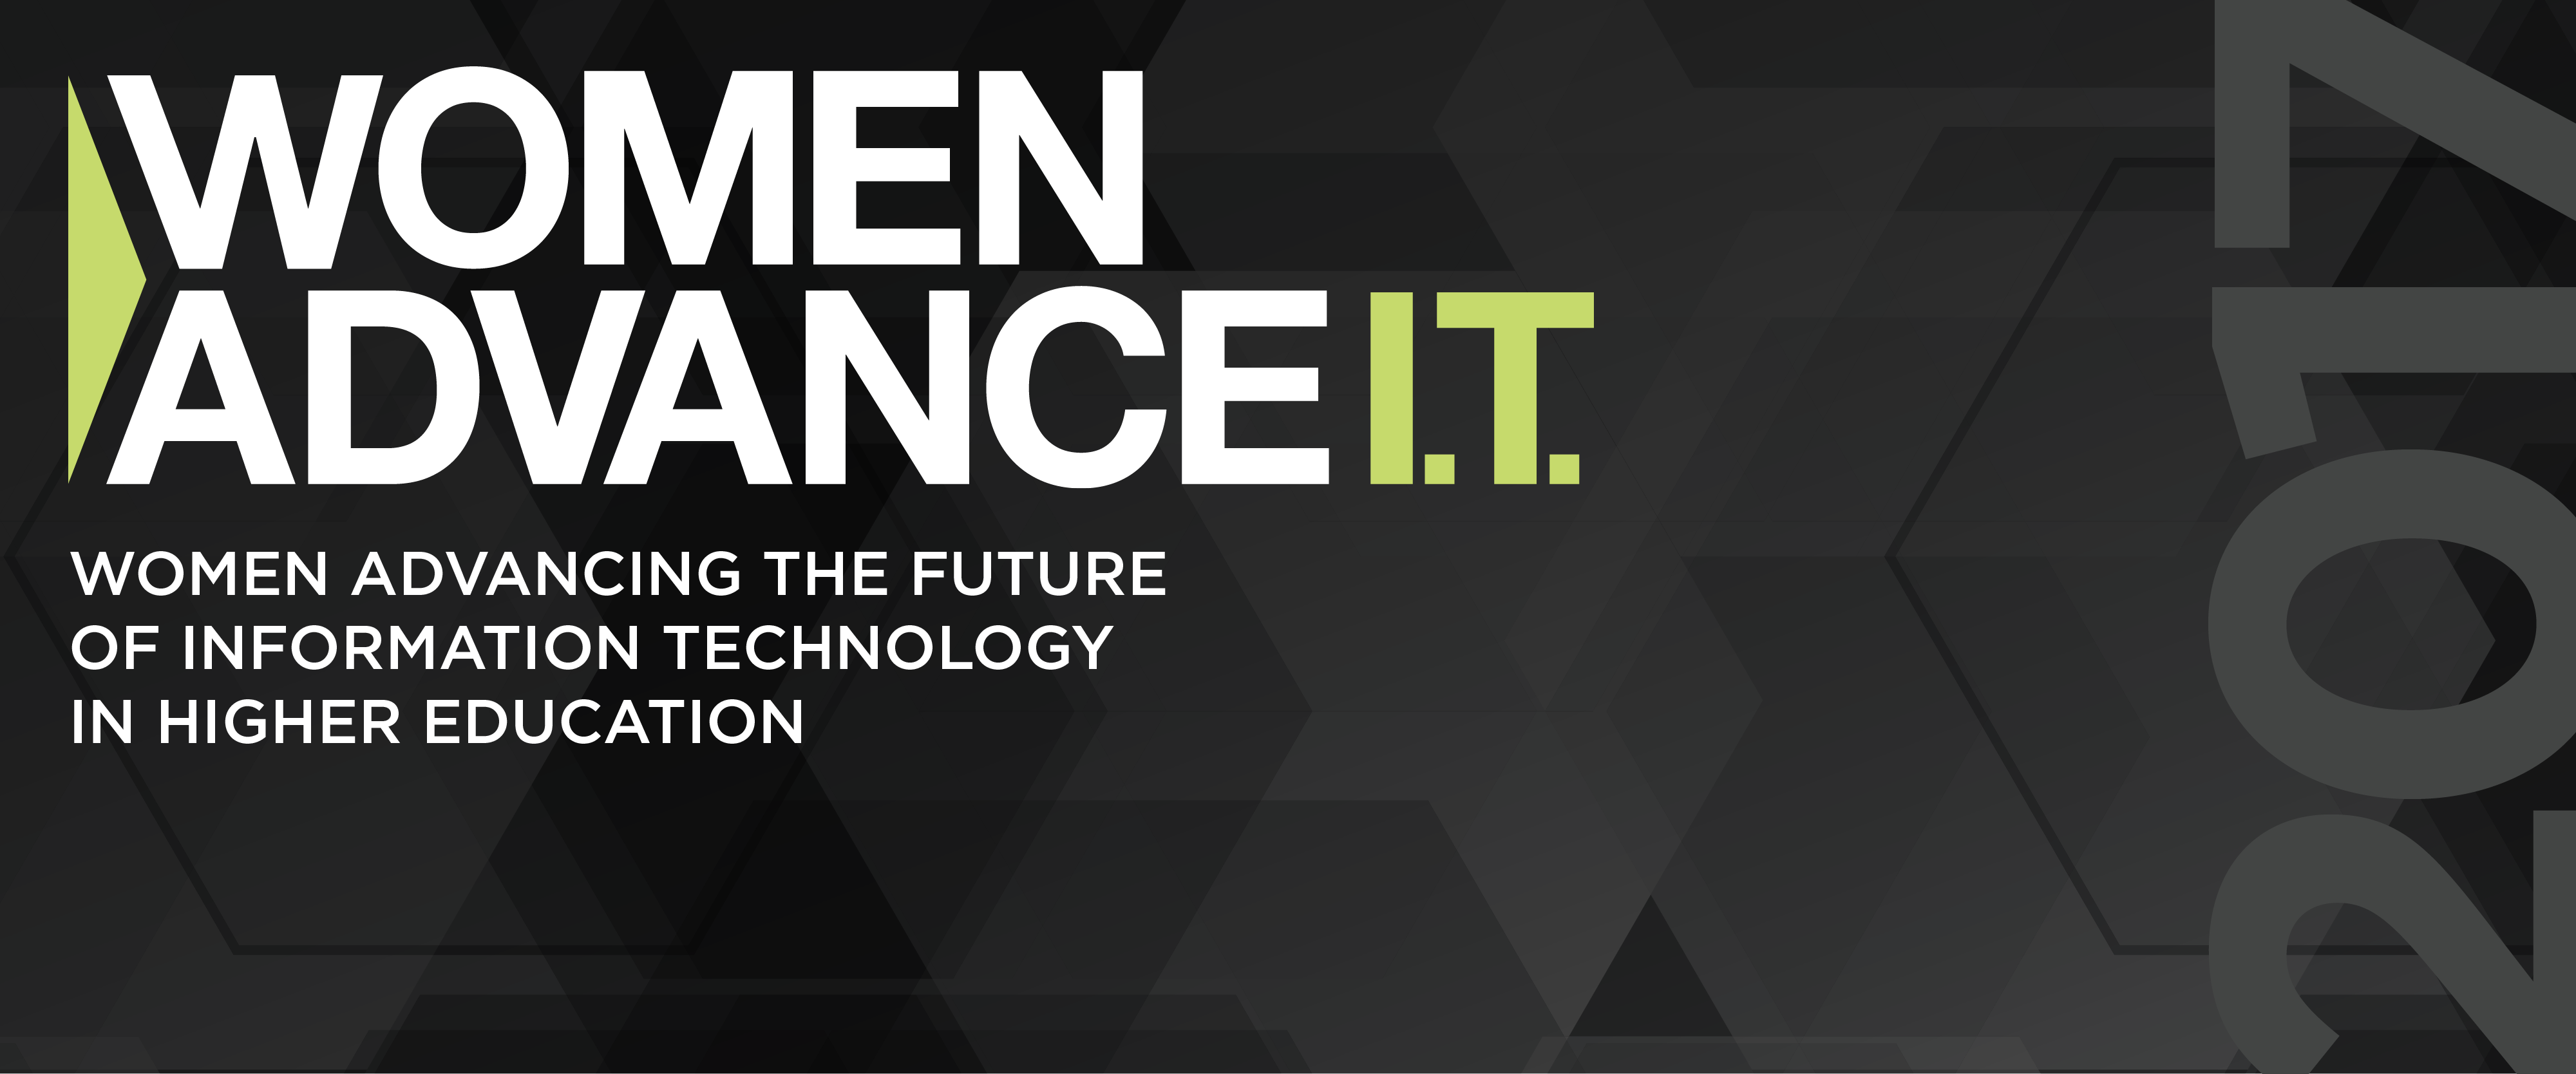 Women Advance I.T. Conference is Oct. 18-19.